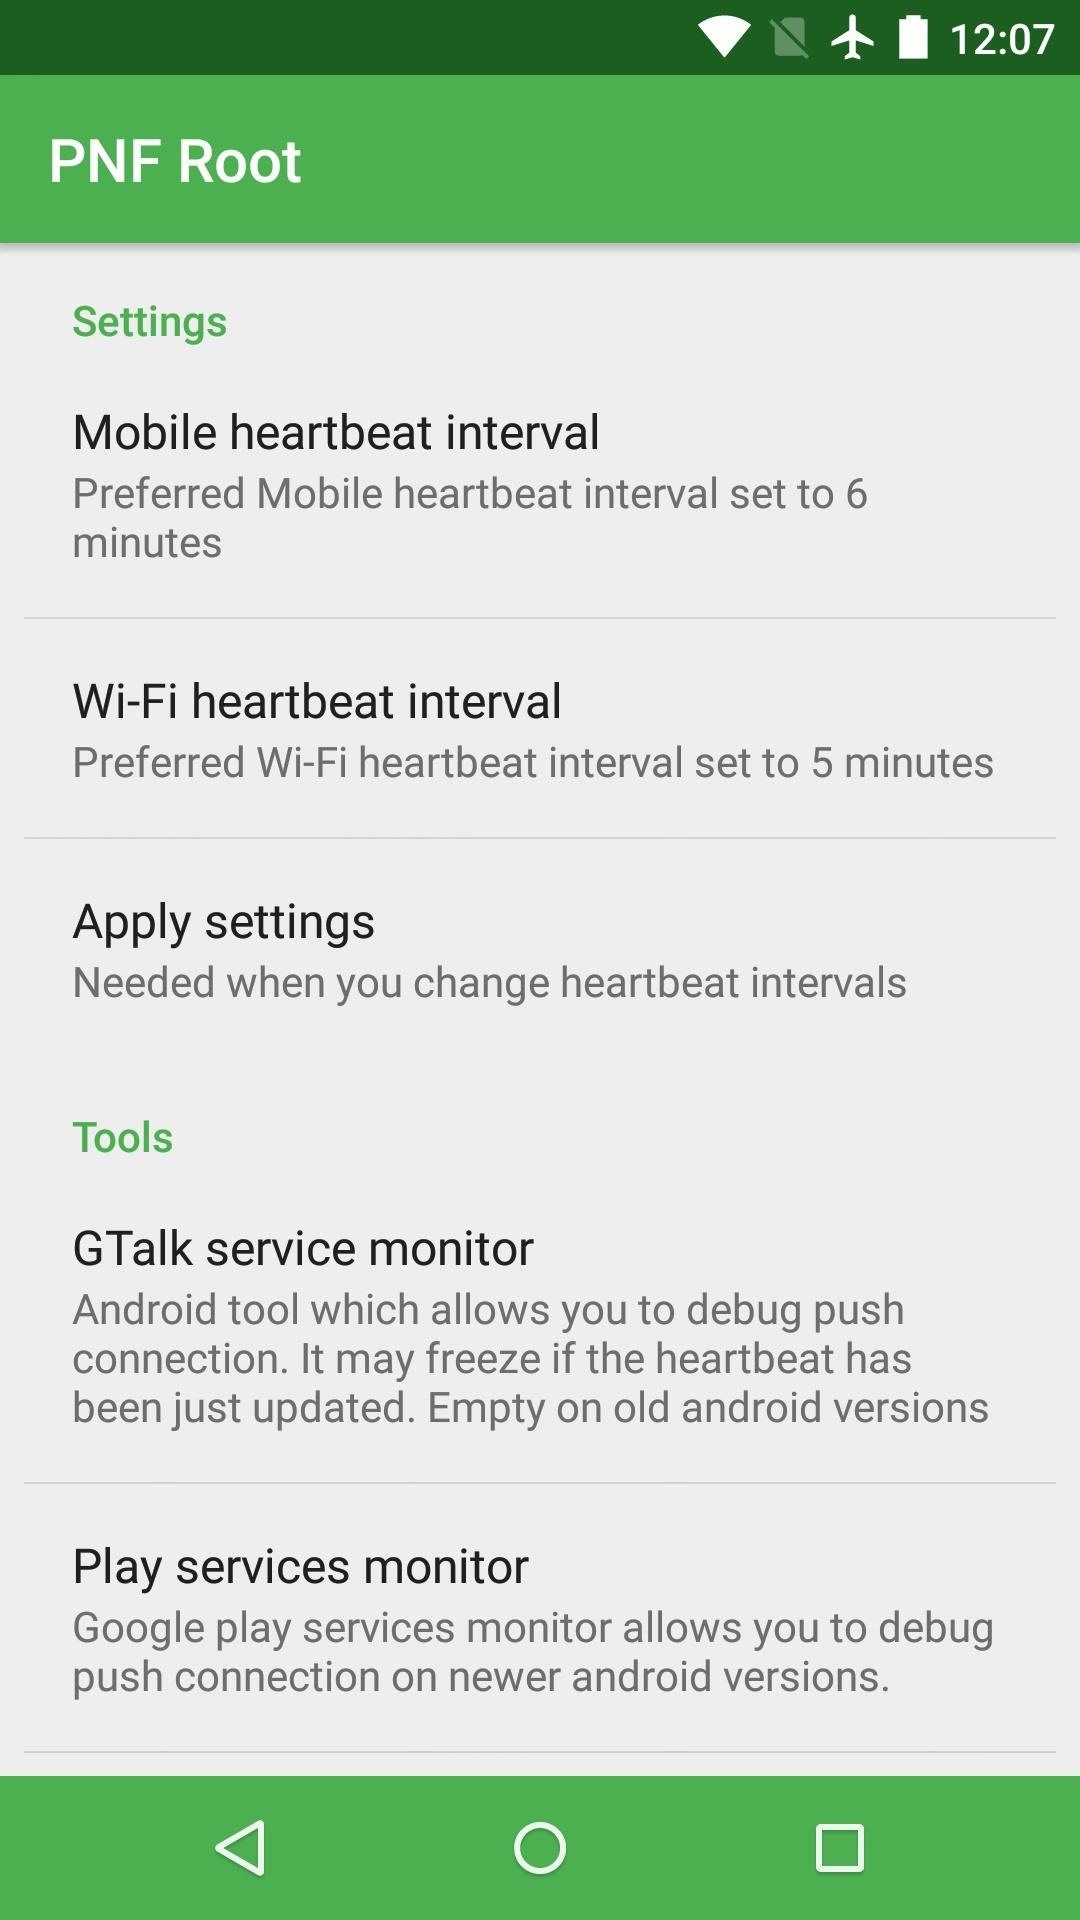 How to Fix Notification Delays on Android